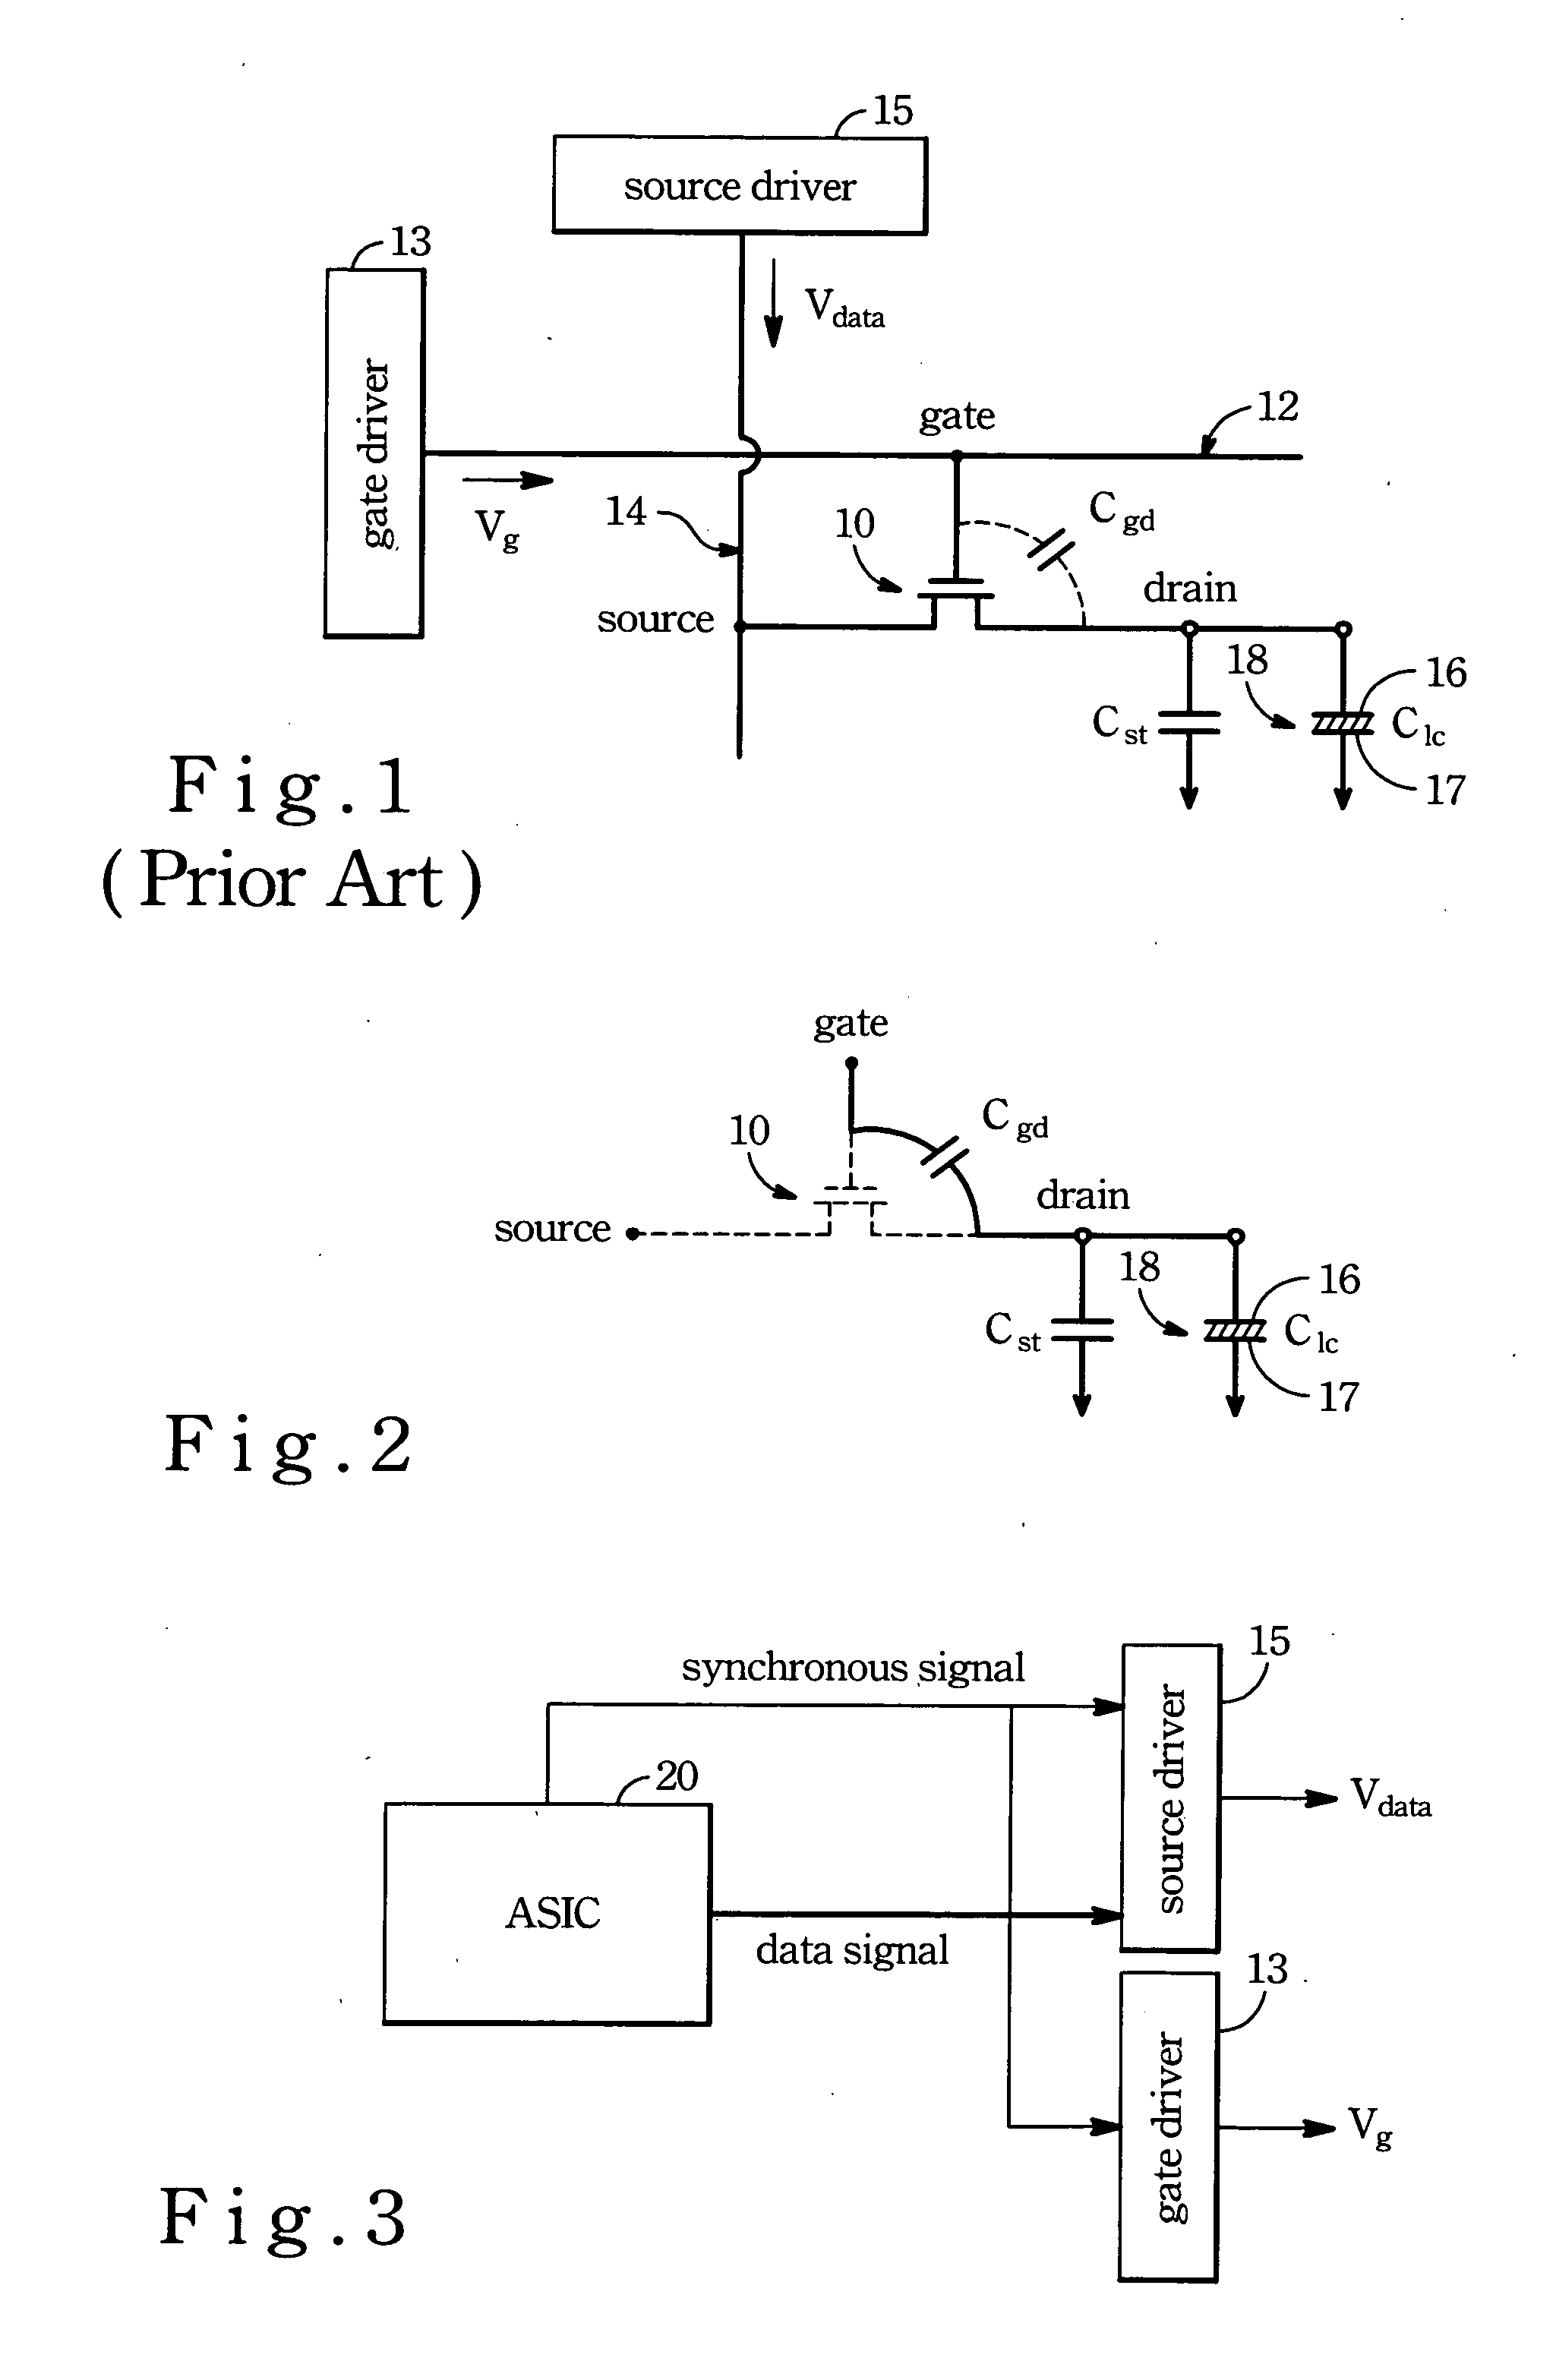 Method for warming-up an LCD (liquid crystal display) system